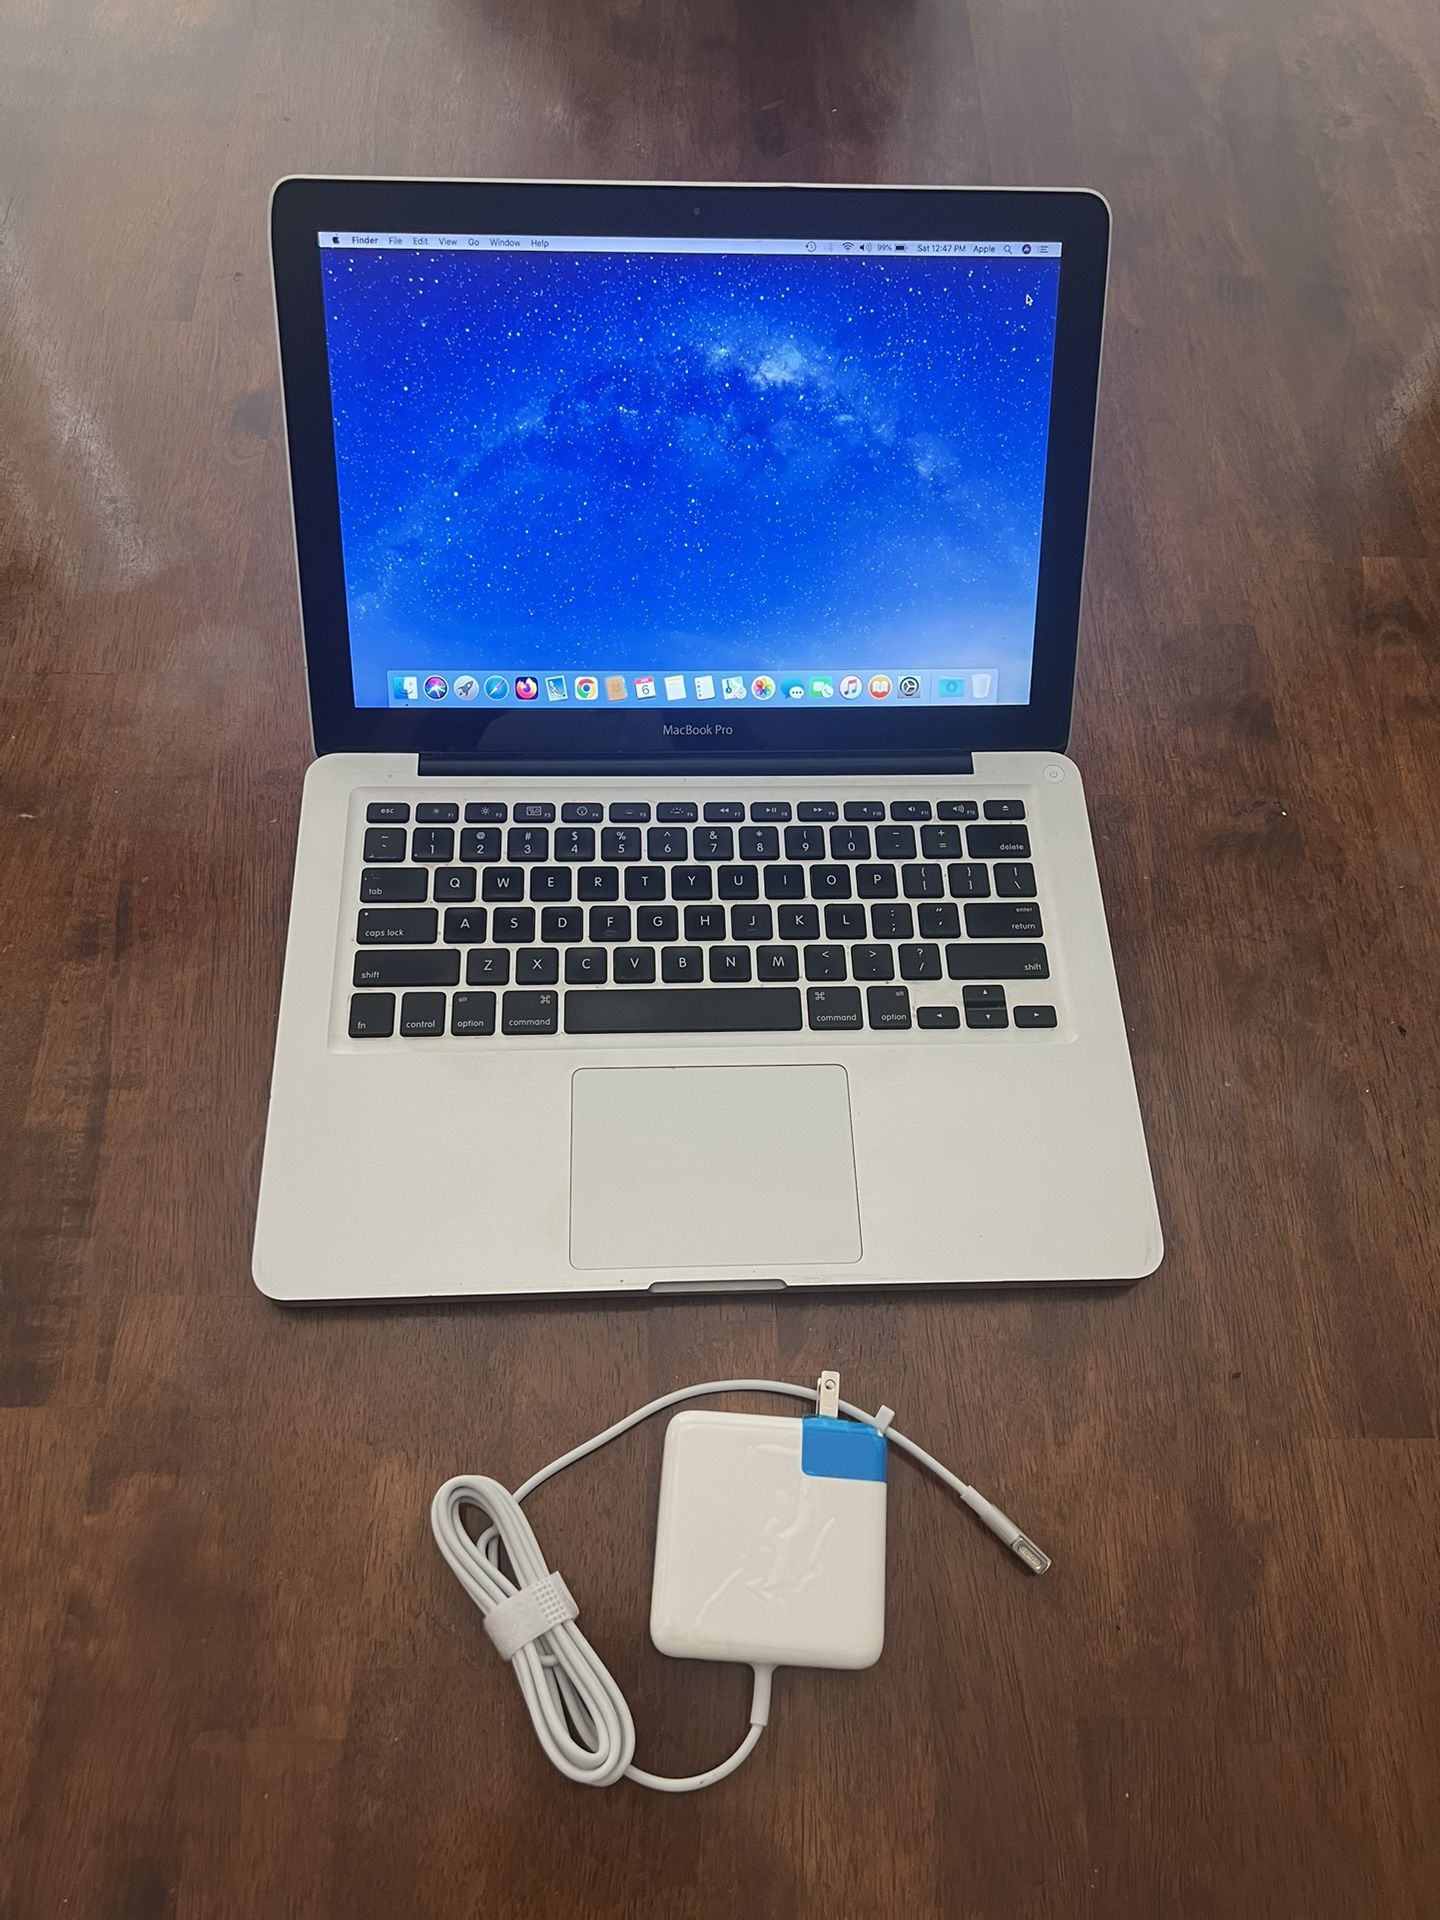 💎 13-inch Apple MacBook Pro 💻 Laptop Computer With Extra Software And New Battery 🔋 